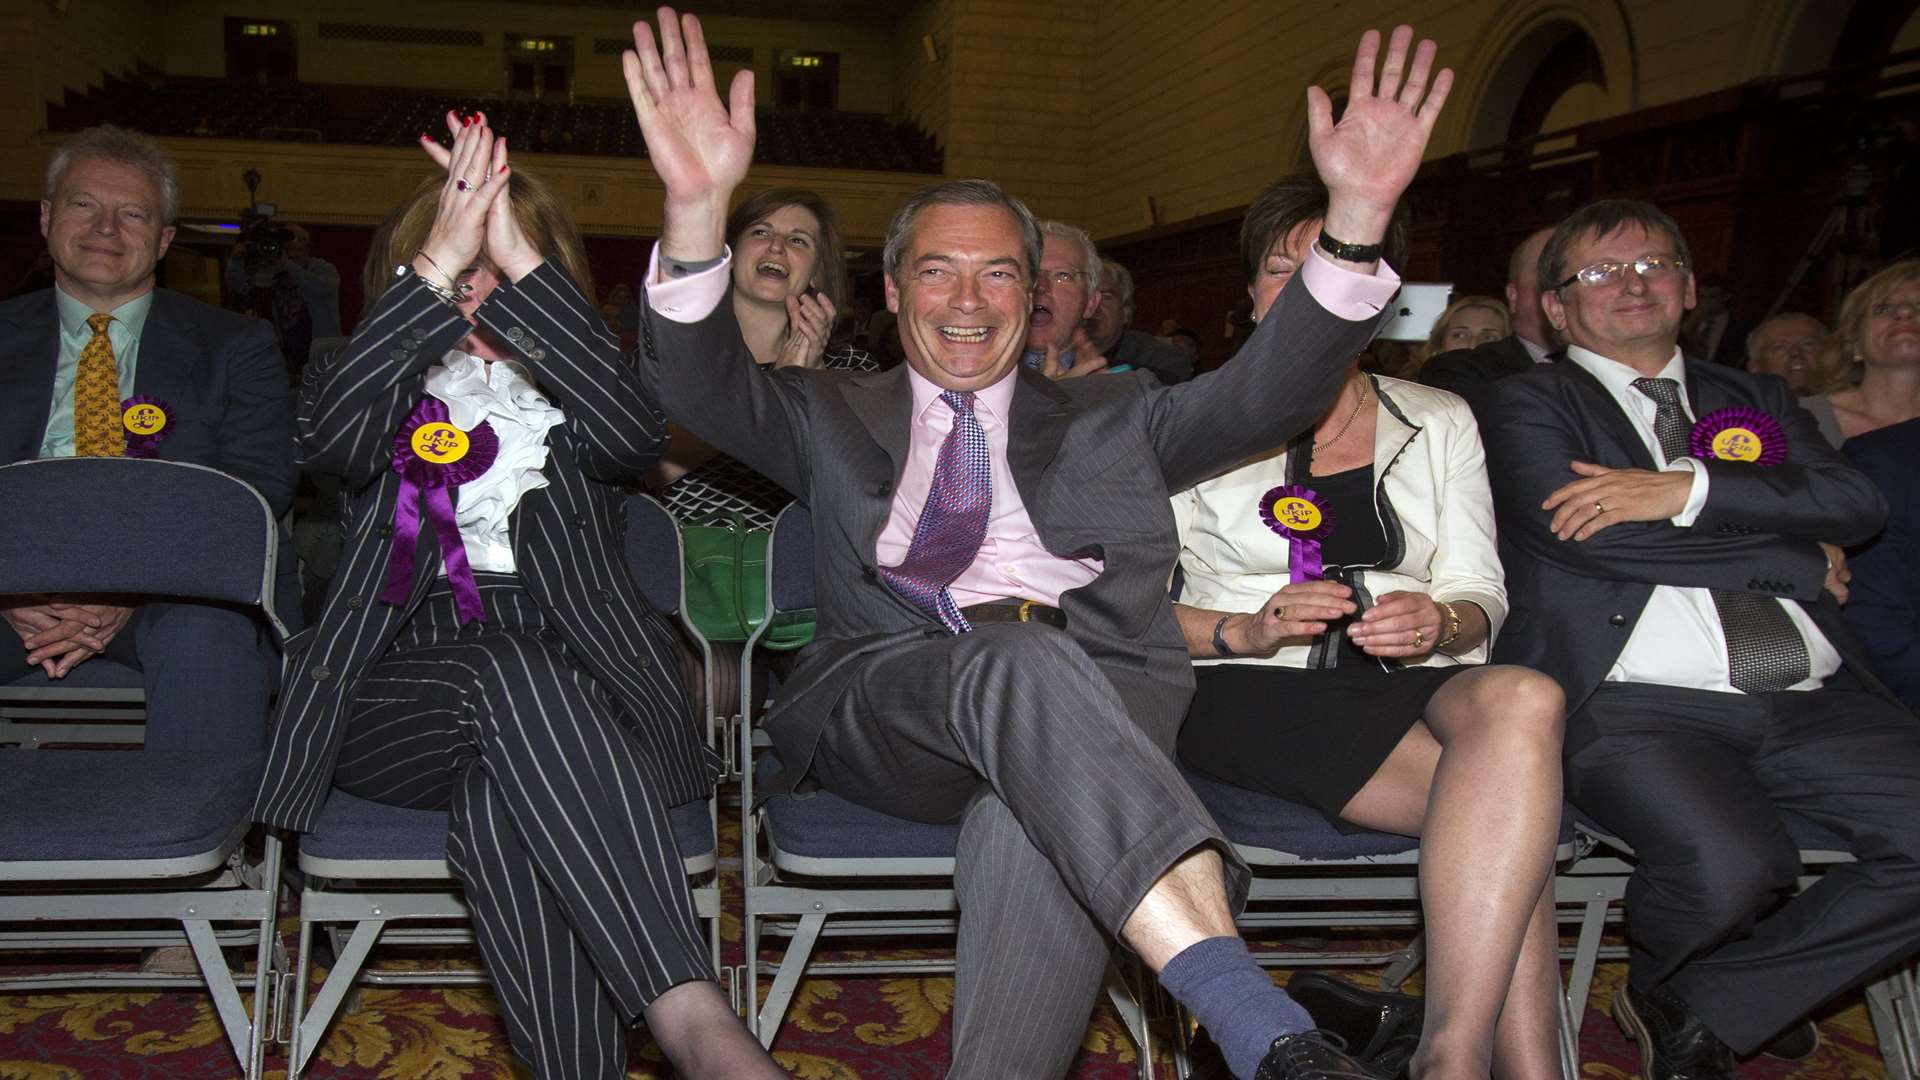 UKIP leader Nigel Farage celebrates the election results. Picture: Jon Rowley/SWNS.com